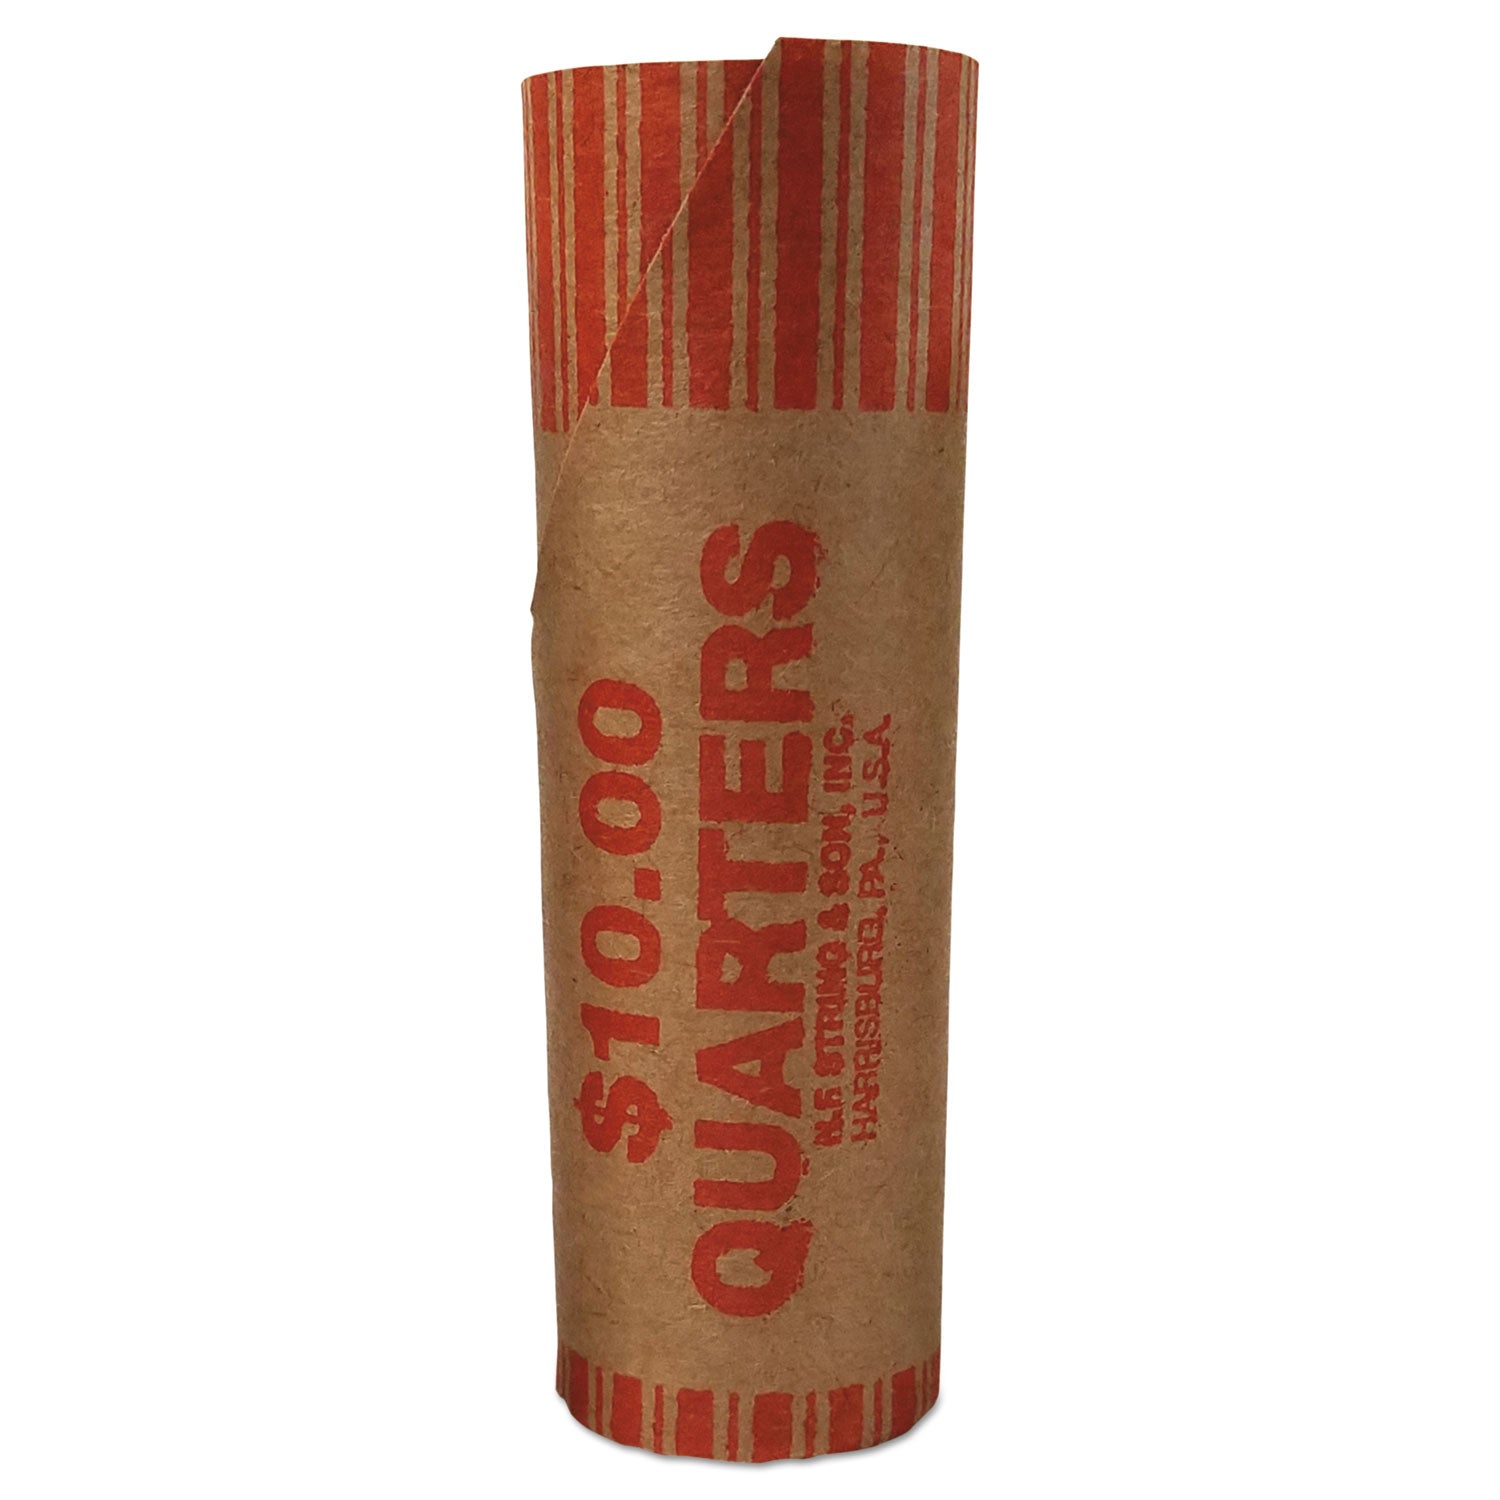 preformed-tubular-coin-wrappers-quarters-$10-1000-wrappers-box_icx94190093 - 1